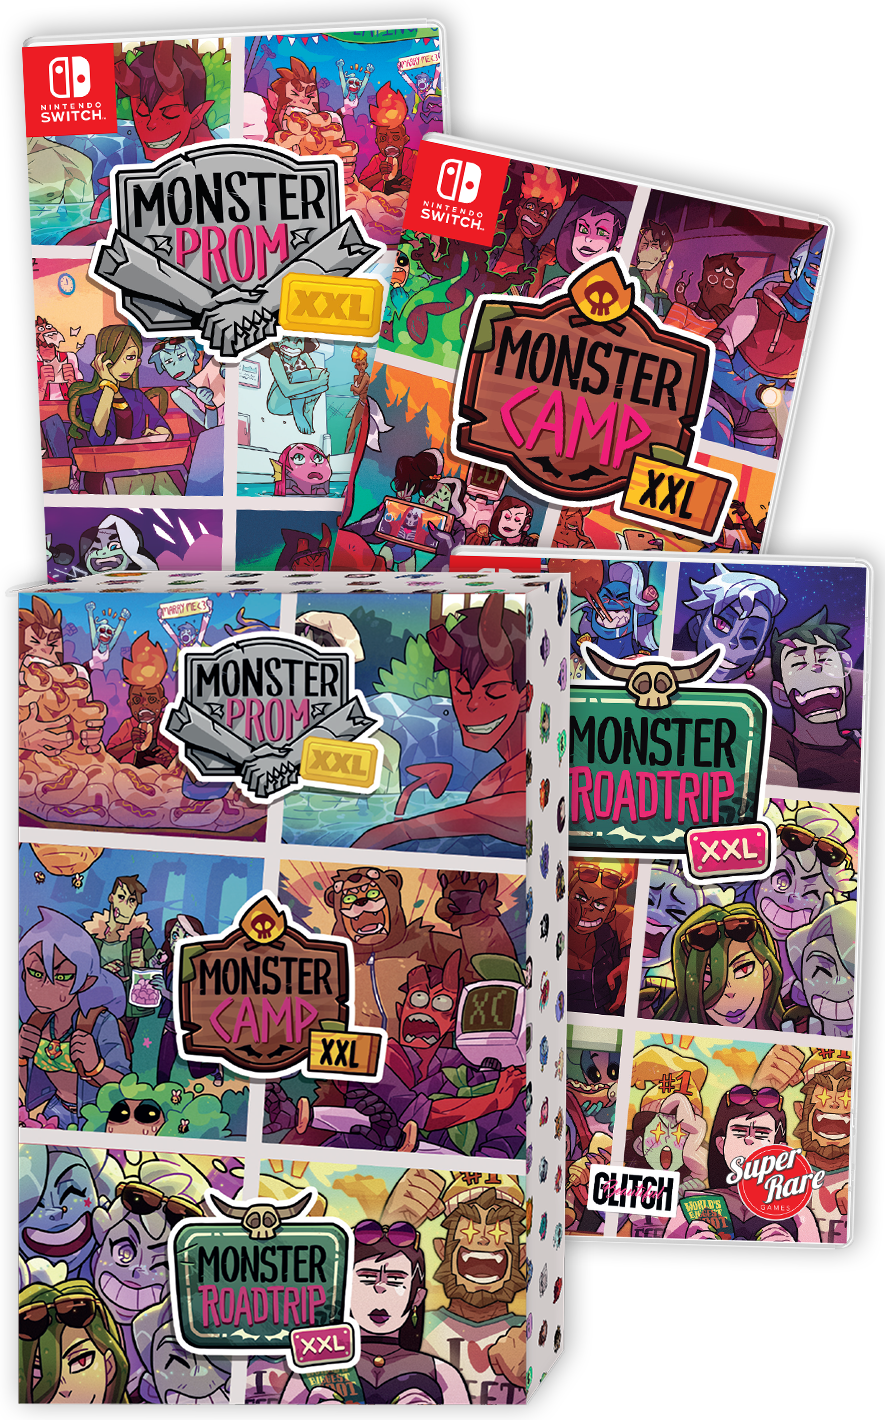 Deluxe edition box with all 3 Monster Prom Games on the front, sectioned in 3 parts. Text reads 'Monster Prom XXL, Monster Camp XXL, Monster Roadtrip XXL'.